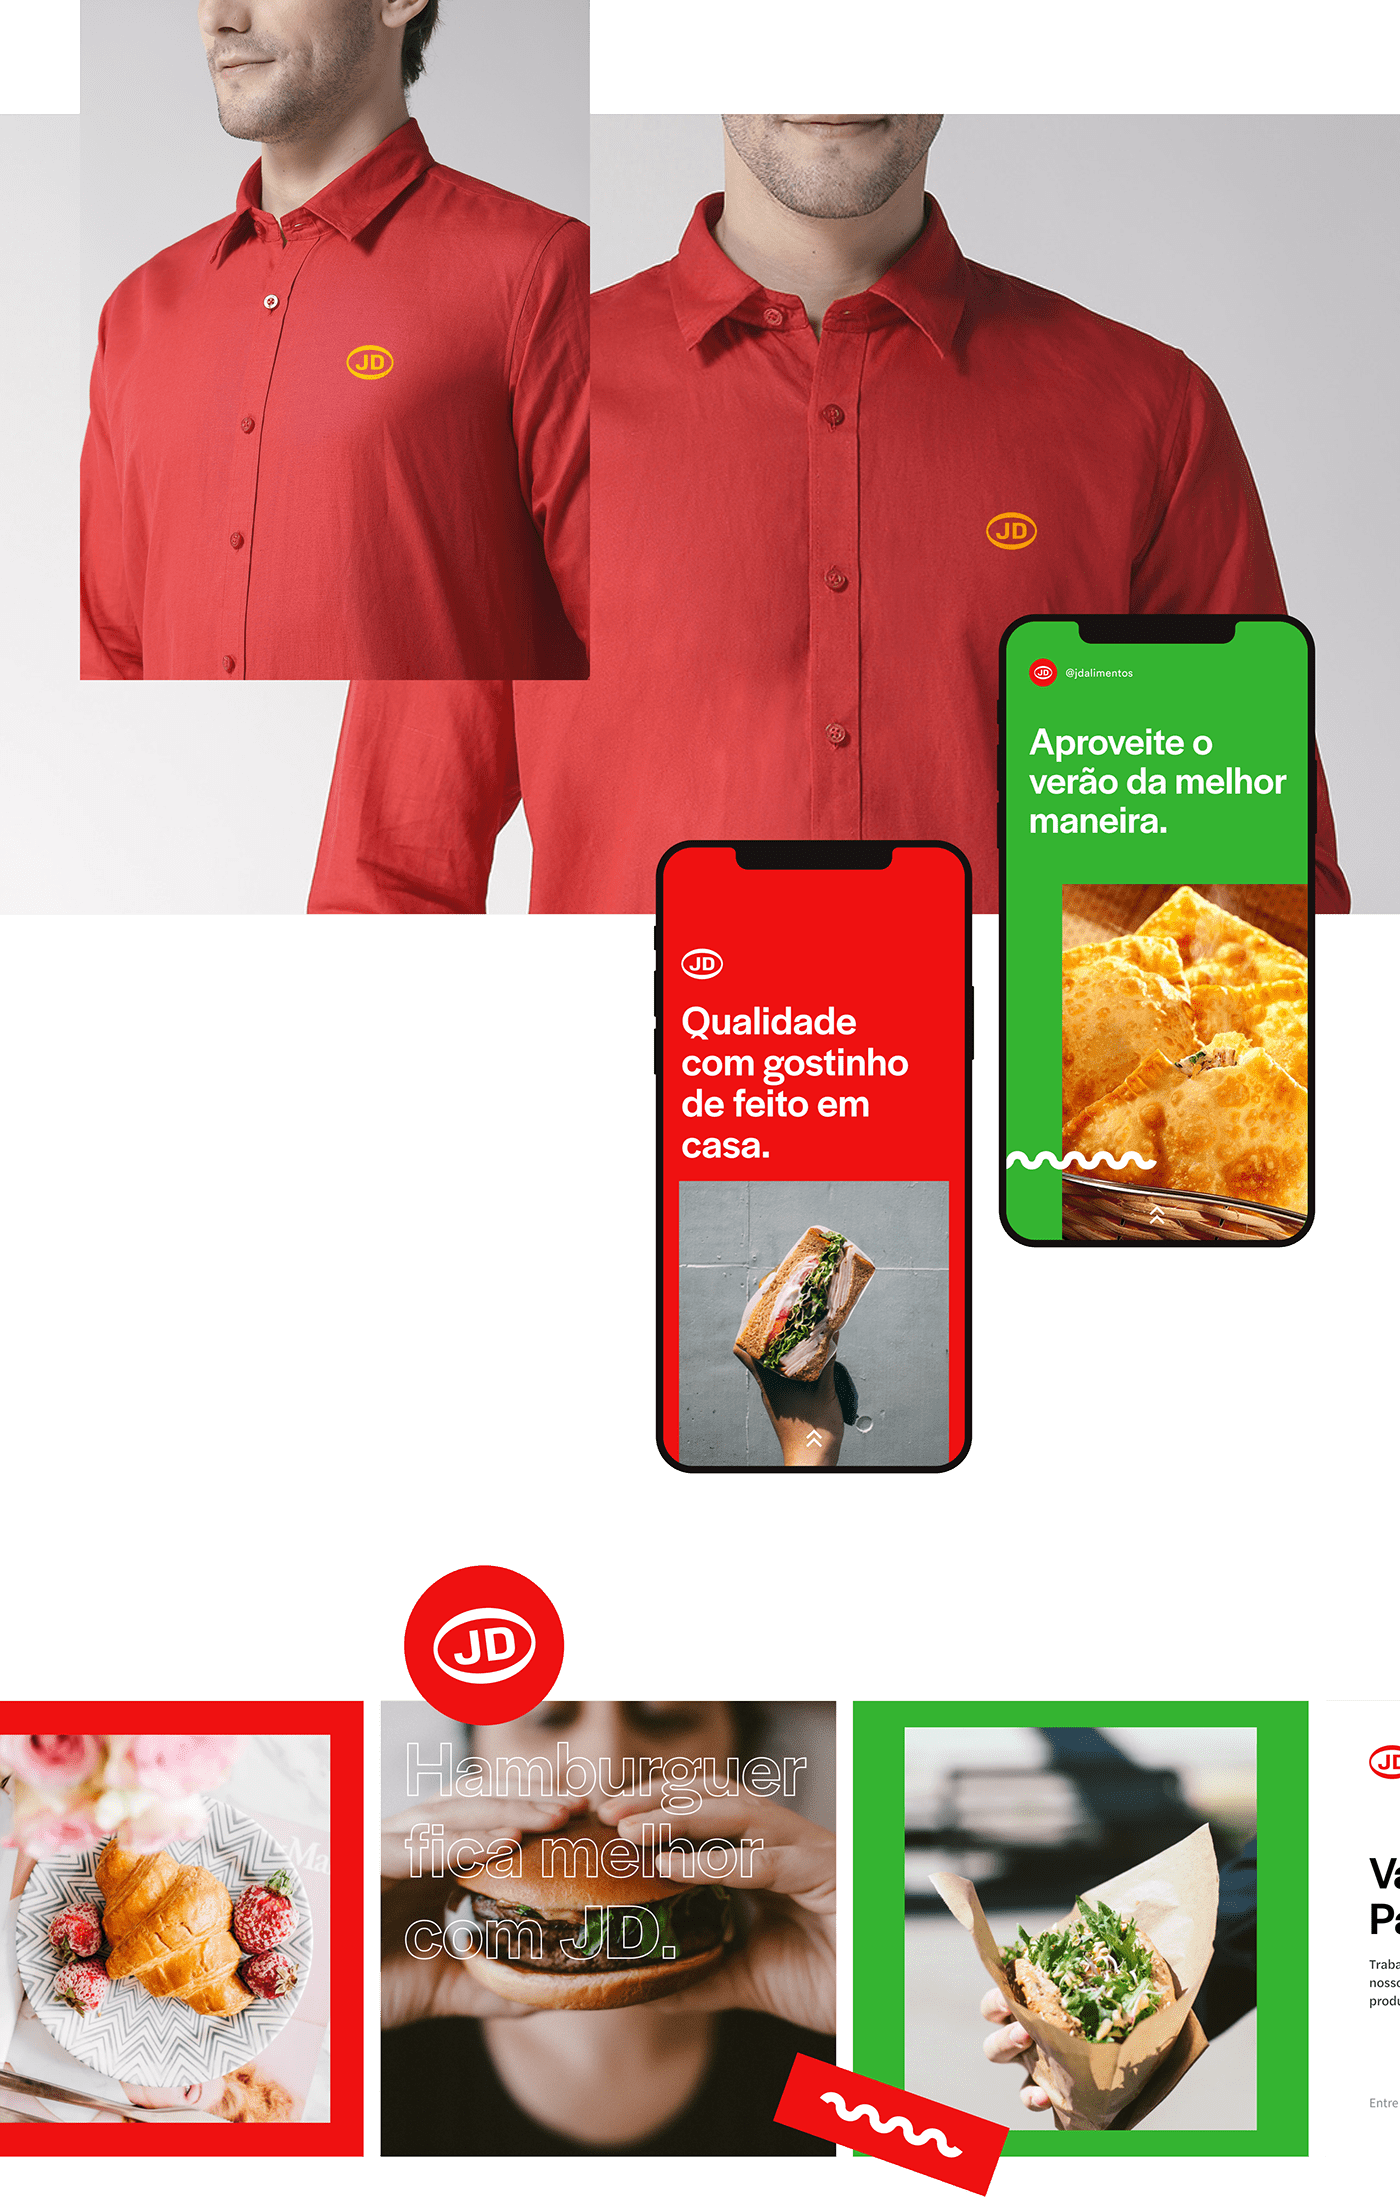 Uniform for JD Alimentos and some social media images